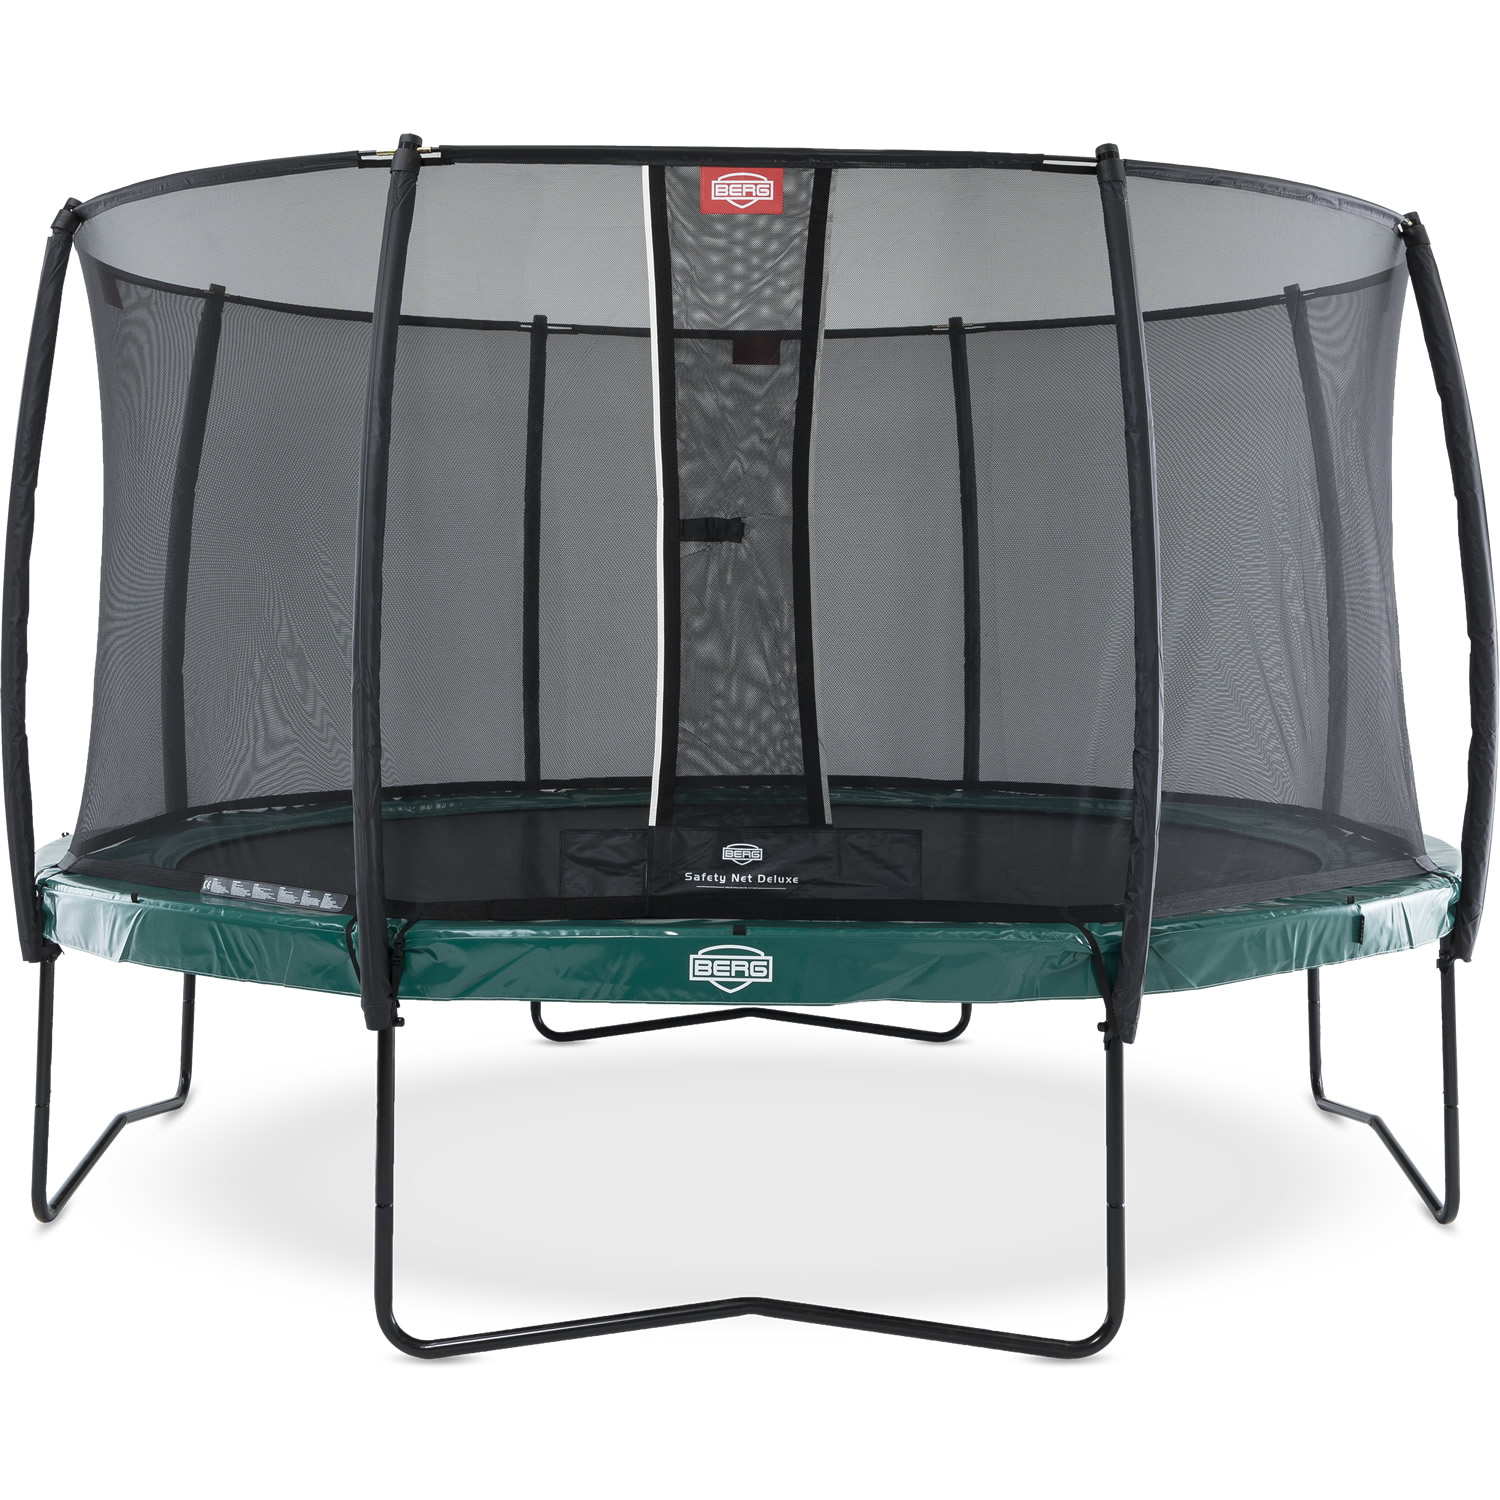 Brein Roos inkt Berg Elite 430 Green incl. Safety Net Deluxe - Best quality, biggest choice